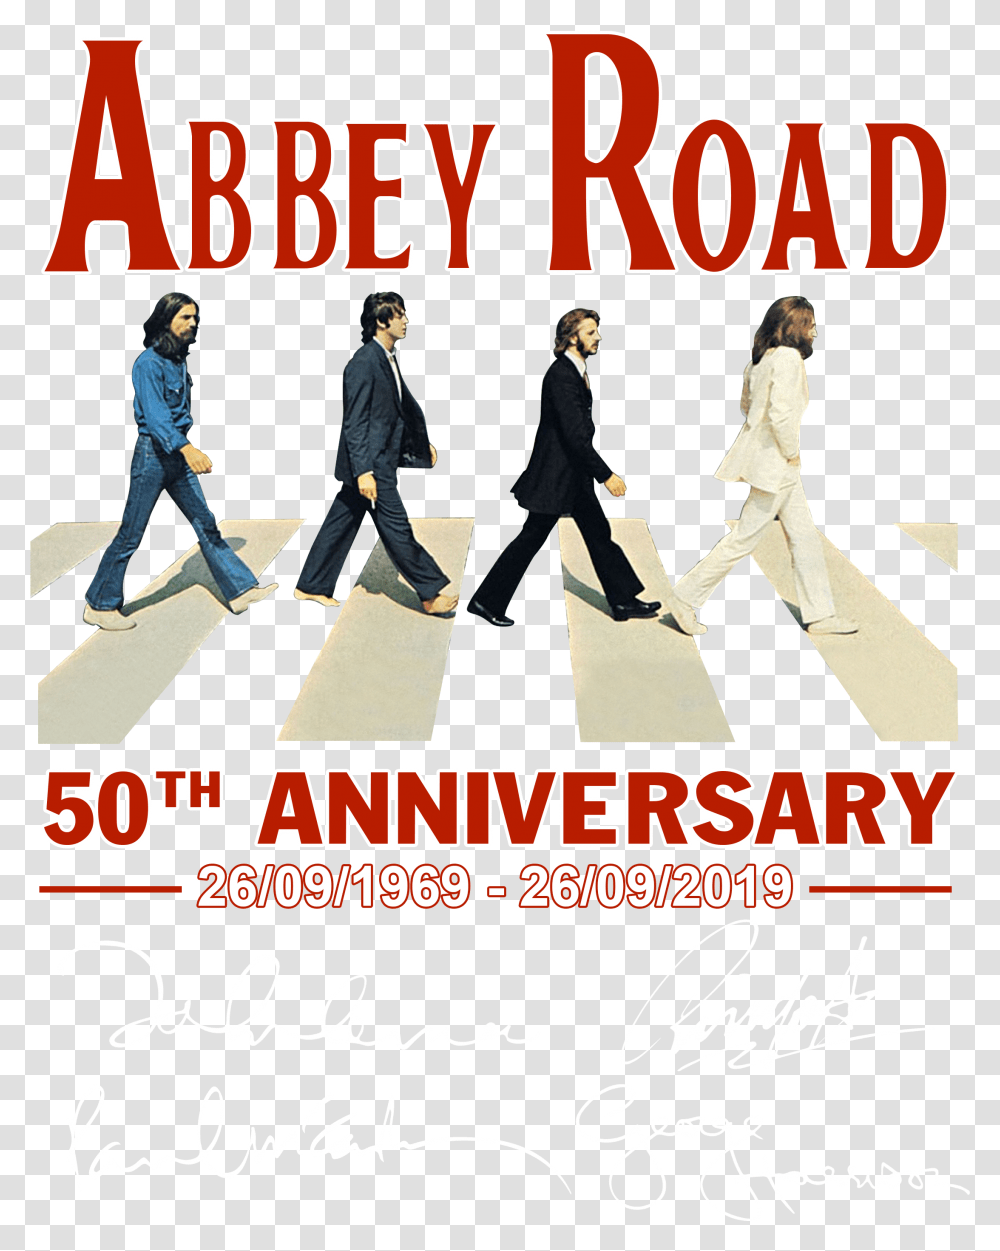 50th Anniversary Of Abbey Road Poster, Person, Tarmac, Pedestrian, Zebra Crossing Transparent Png